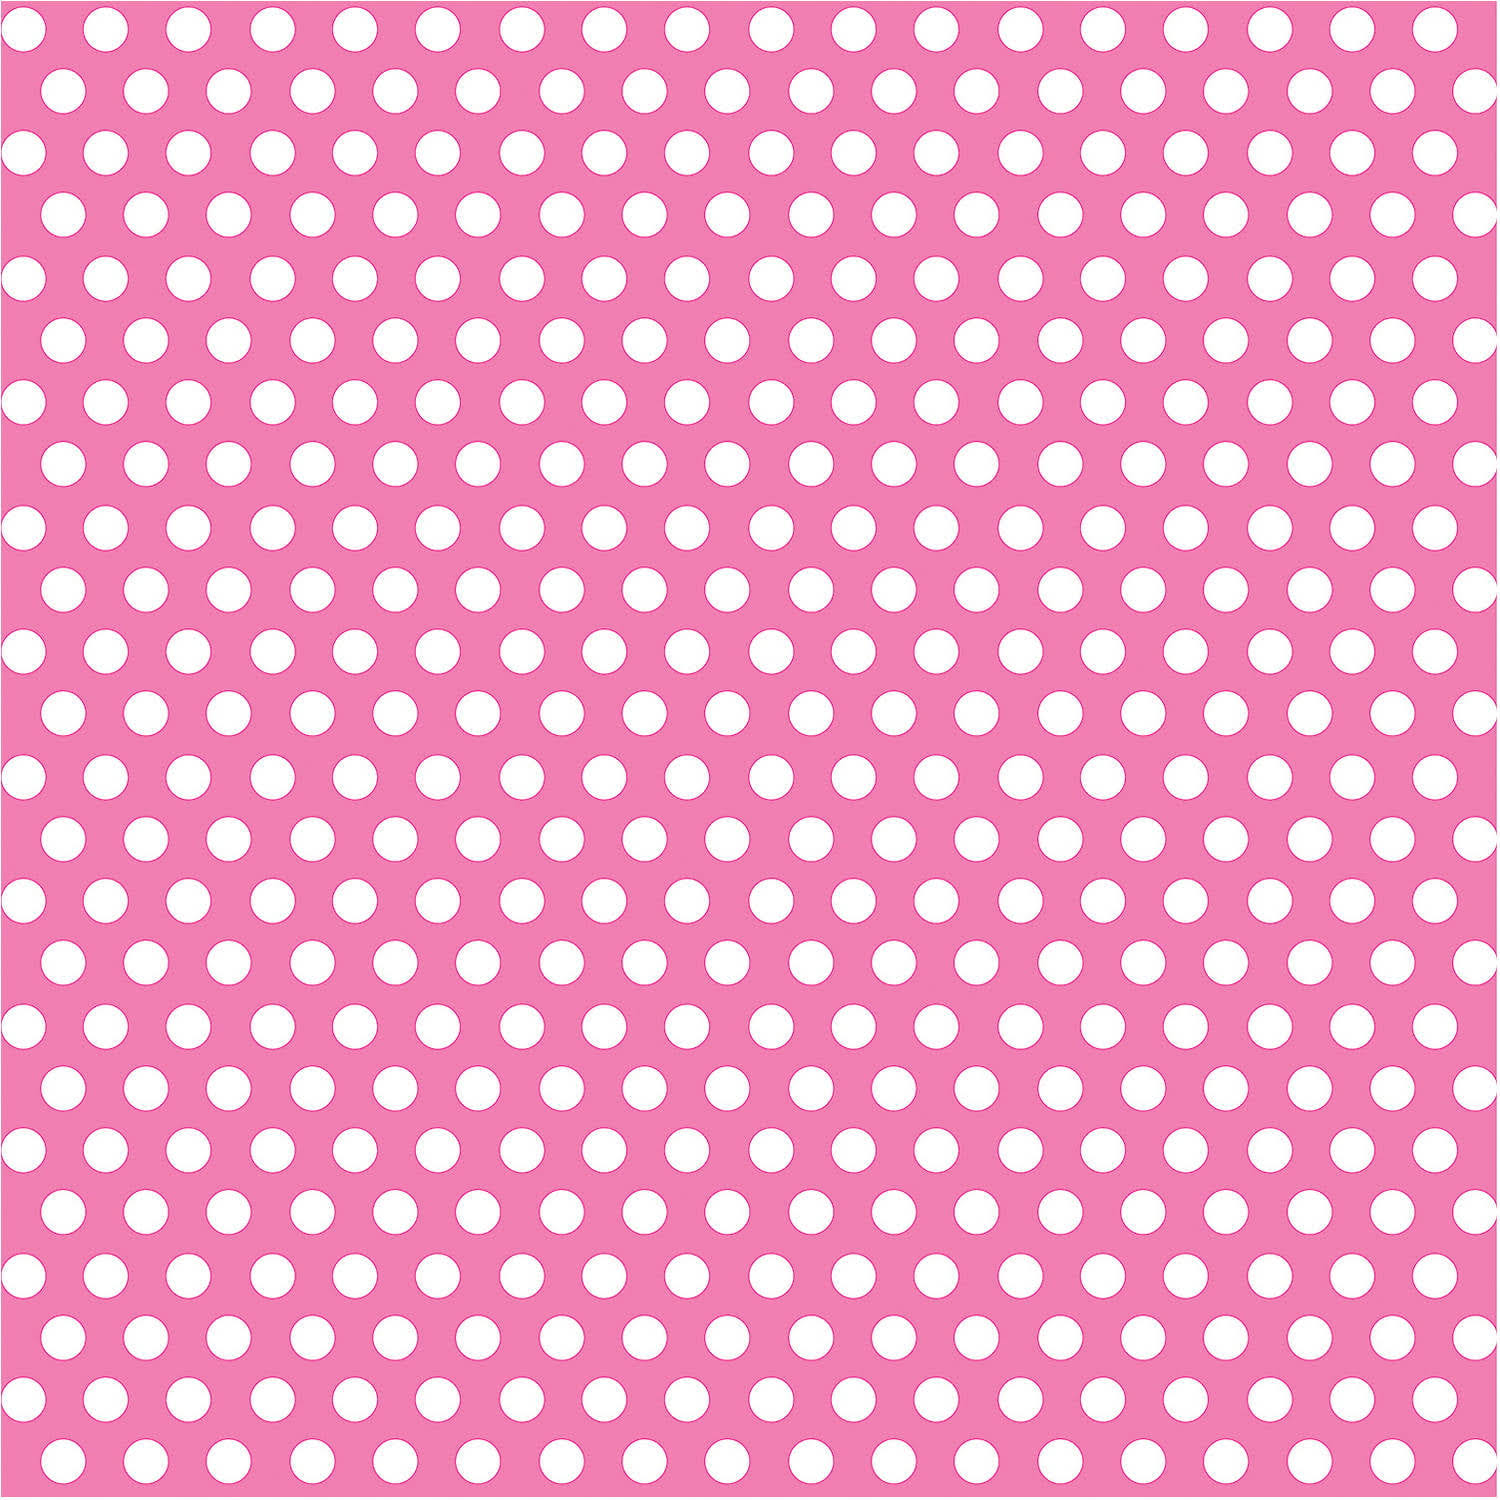 Decorative Dots Gift Wrap - Hot Pink, 30"x5'